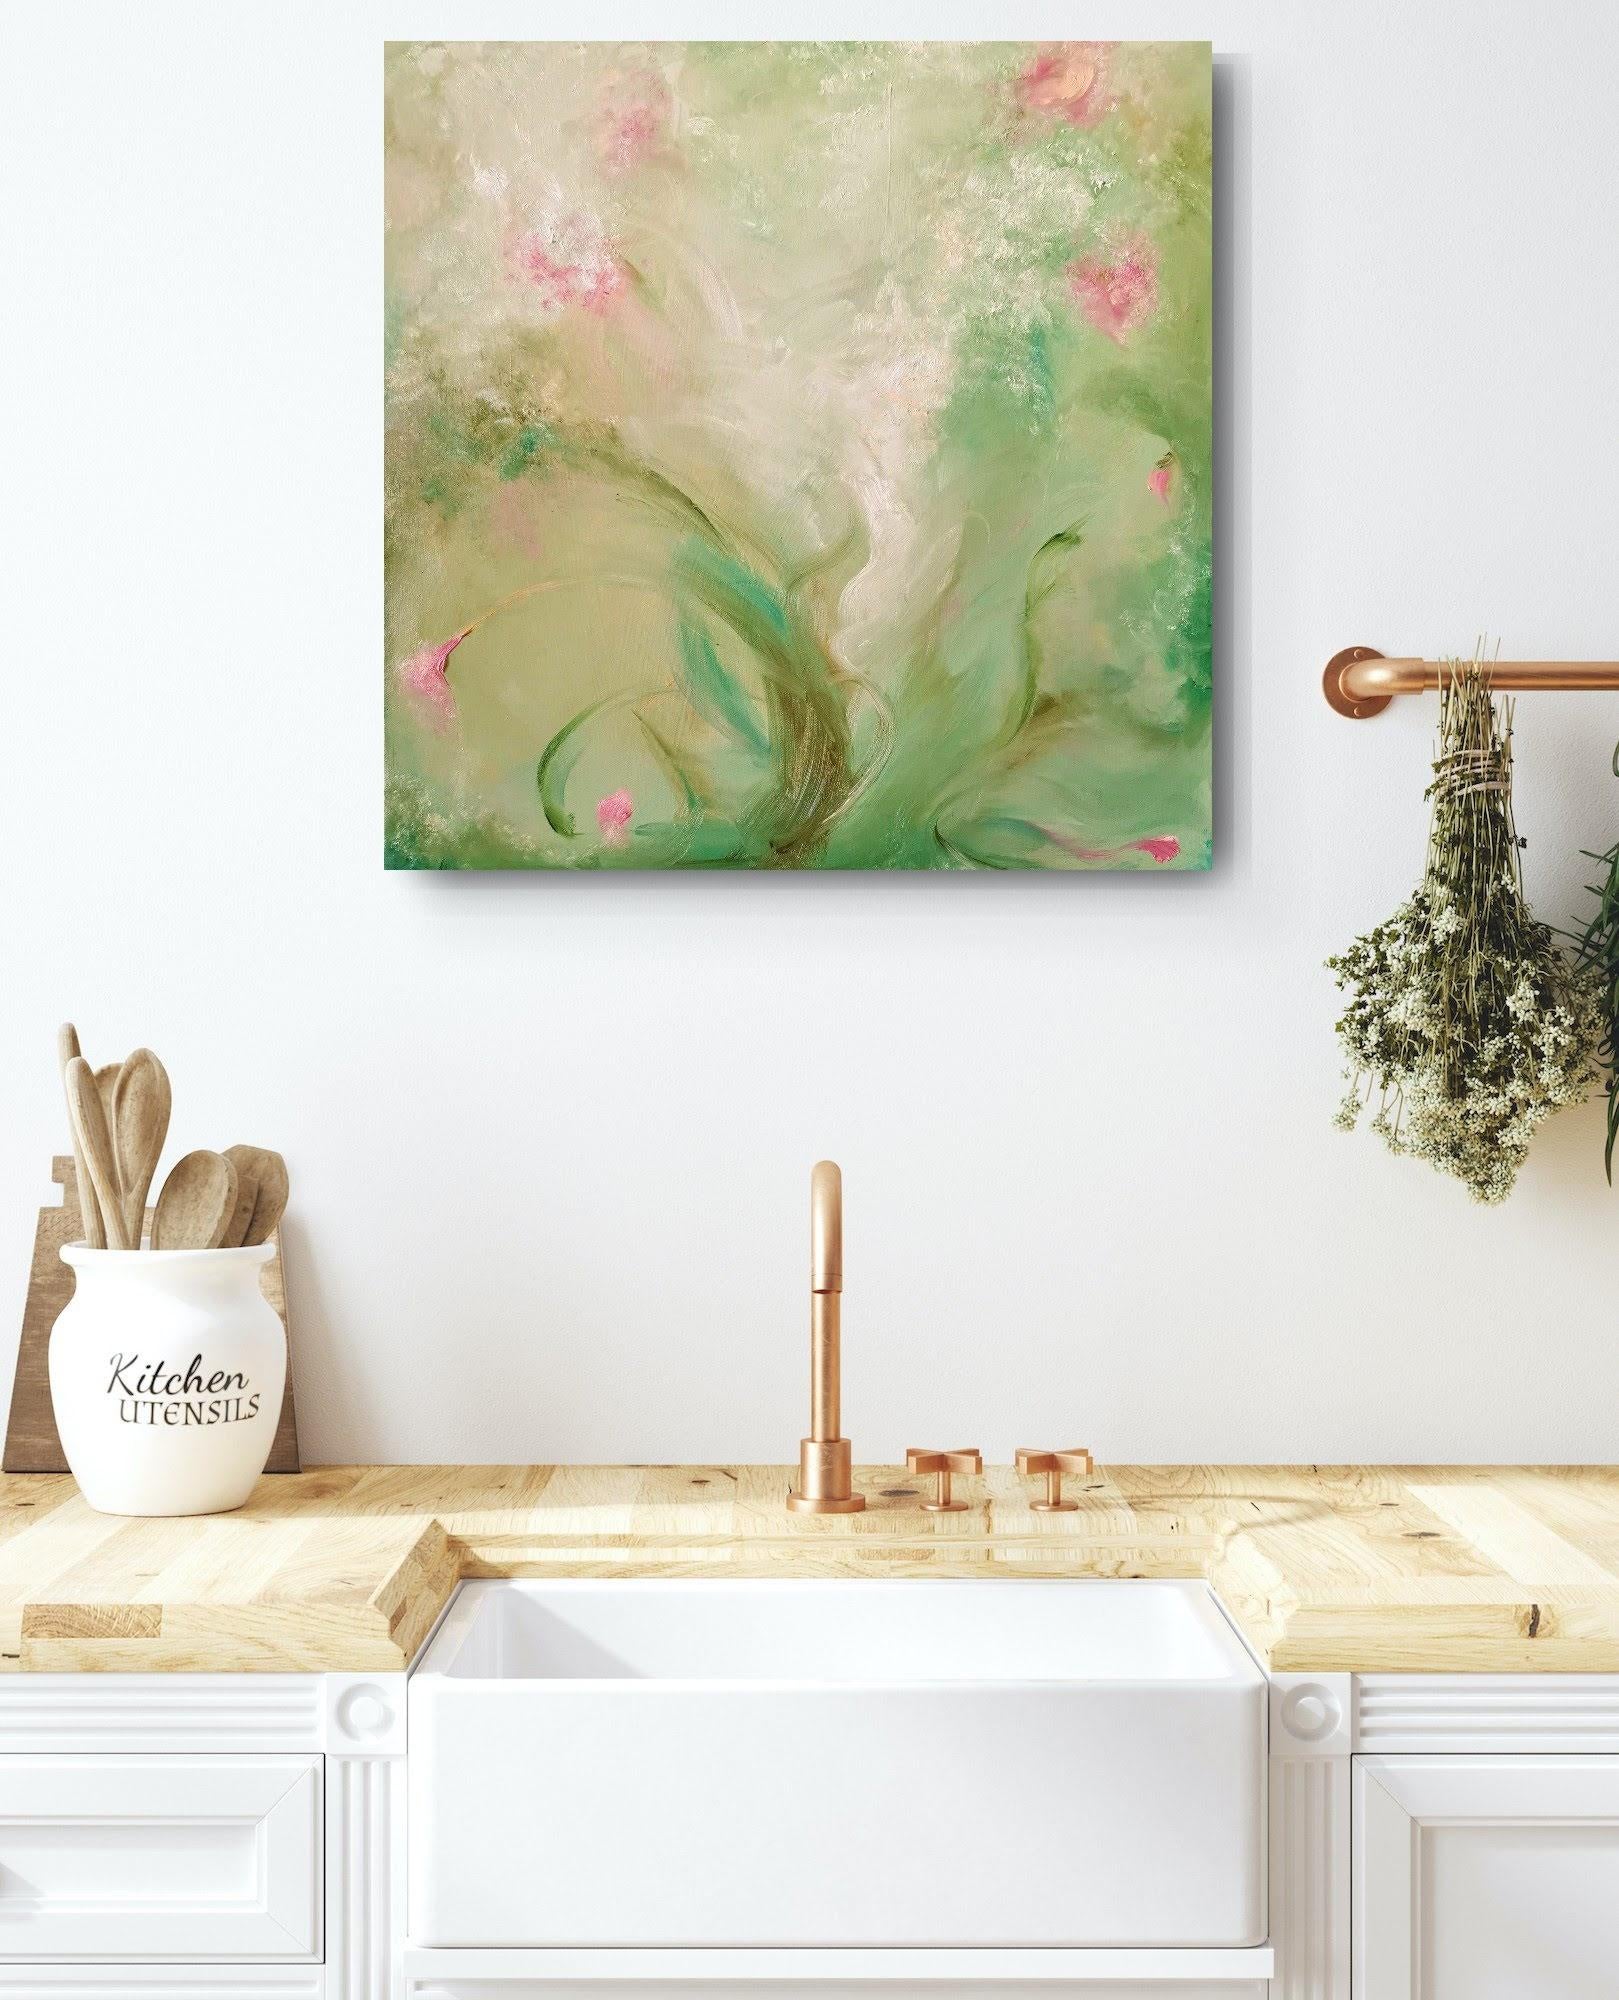 A most verdant spring - Whimsical green and pink abstract painting 5